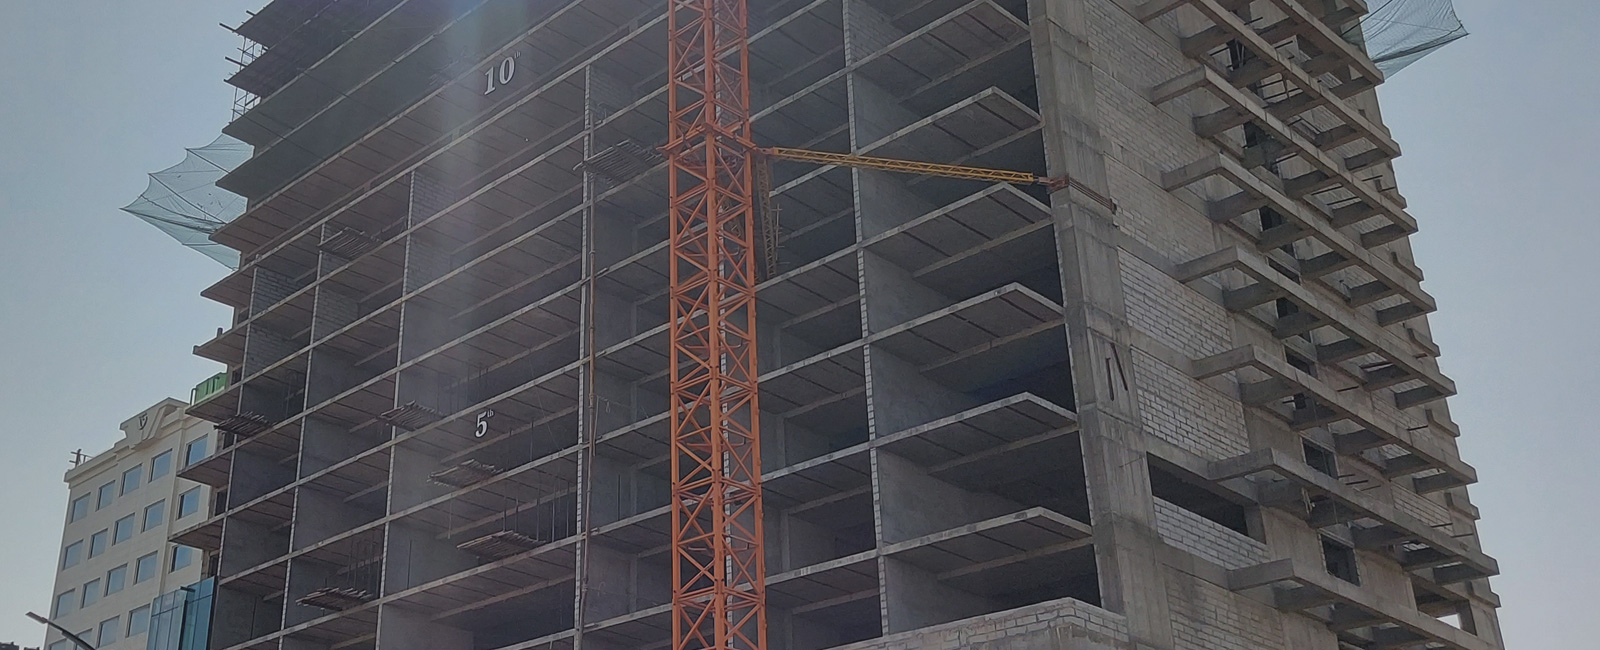 Post Tensioning finds applications in almost all structures in construction